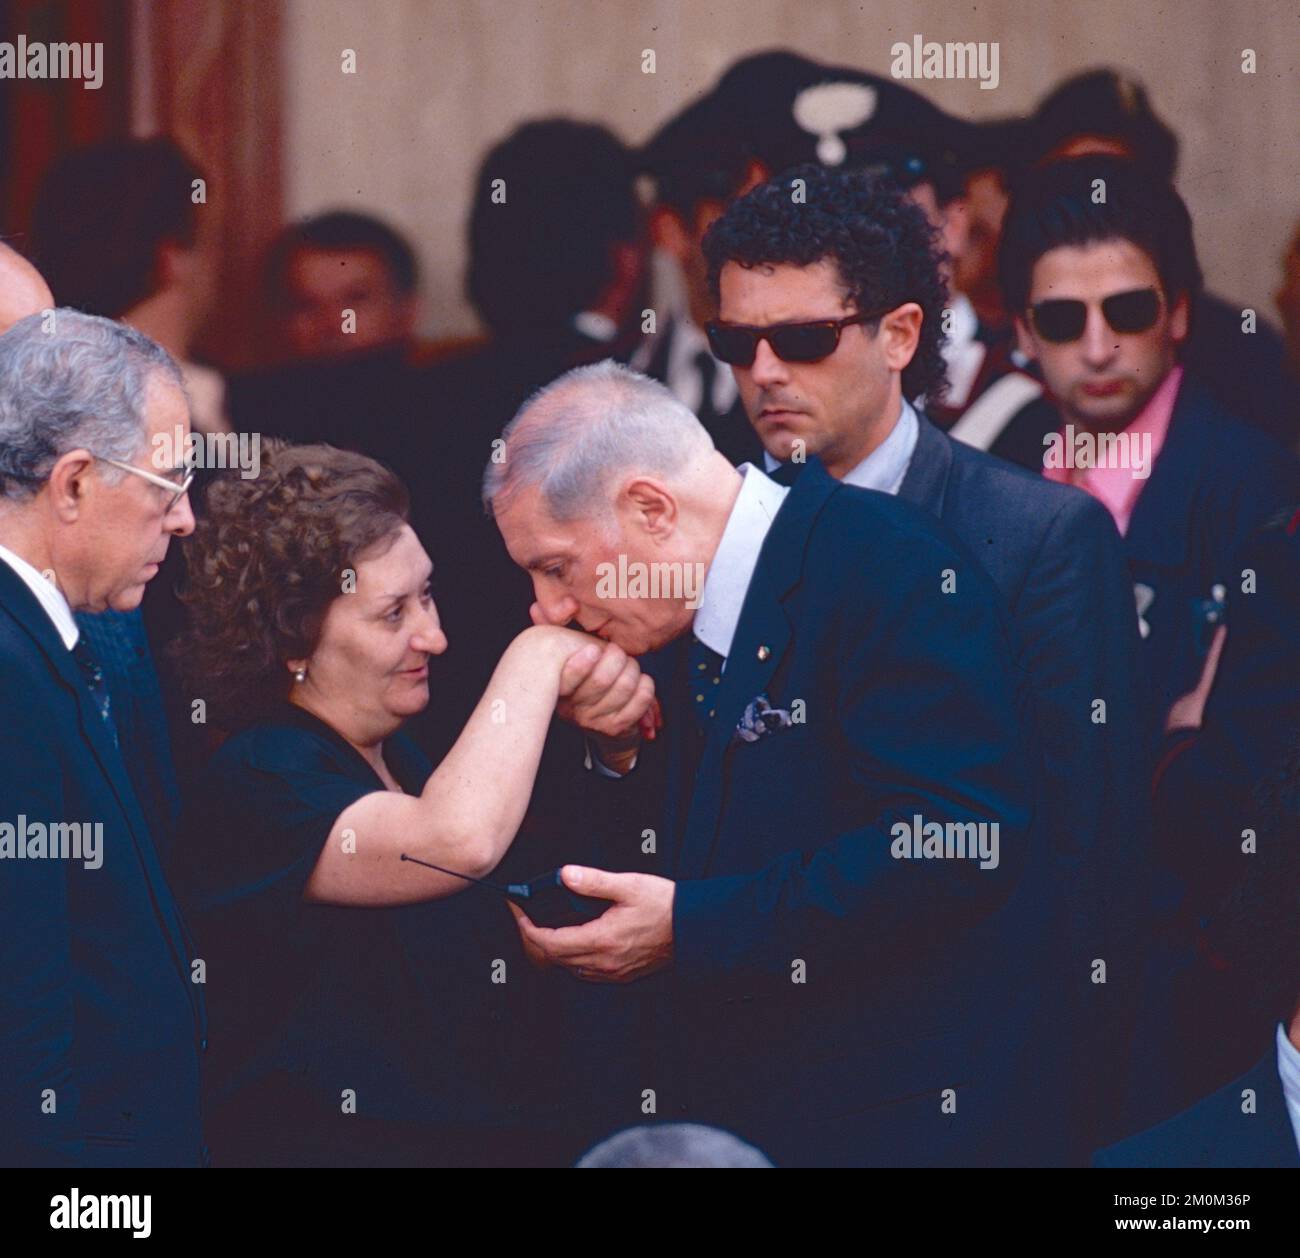 Chief Police Vincenzo Parisi at the Funeral of Italian magistrate killed by the mafia Paolo Borsellino, Palermo, Italy 1992 Stock Photo